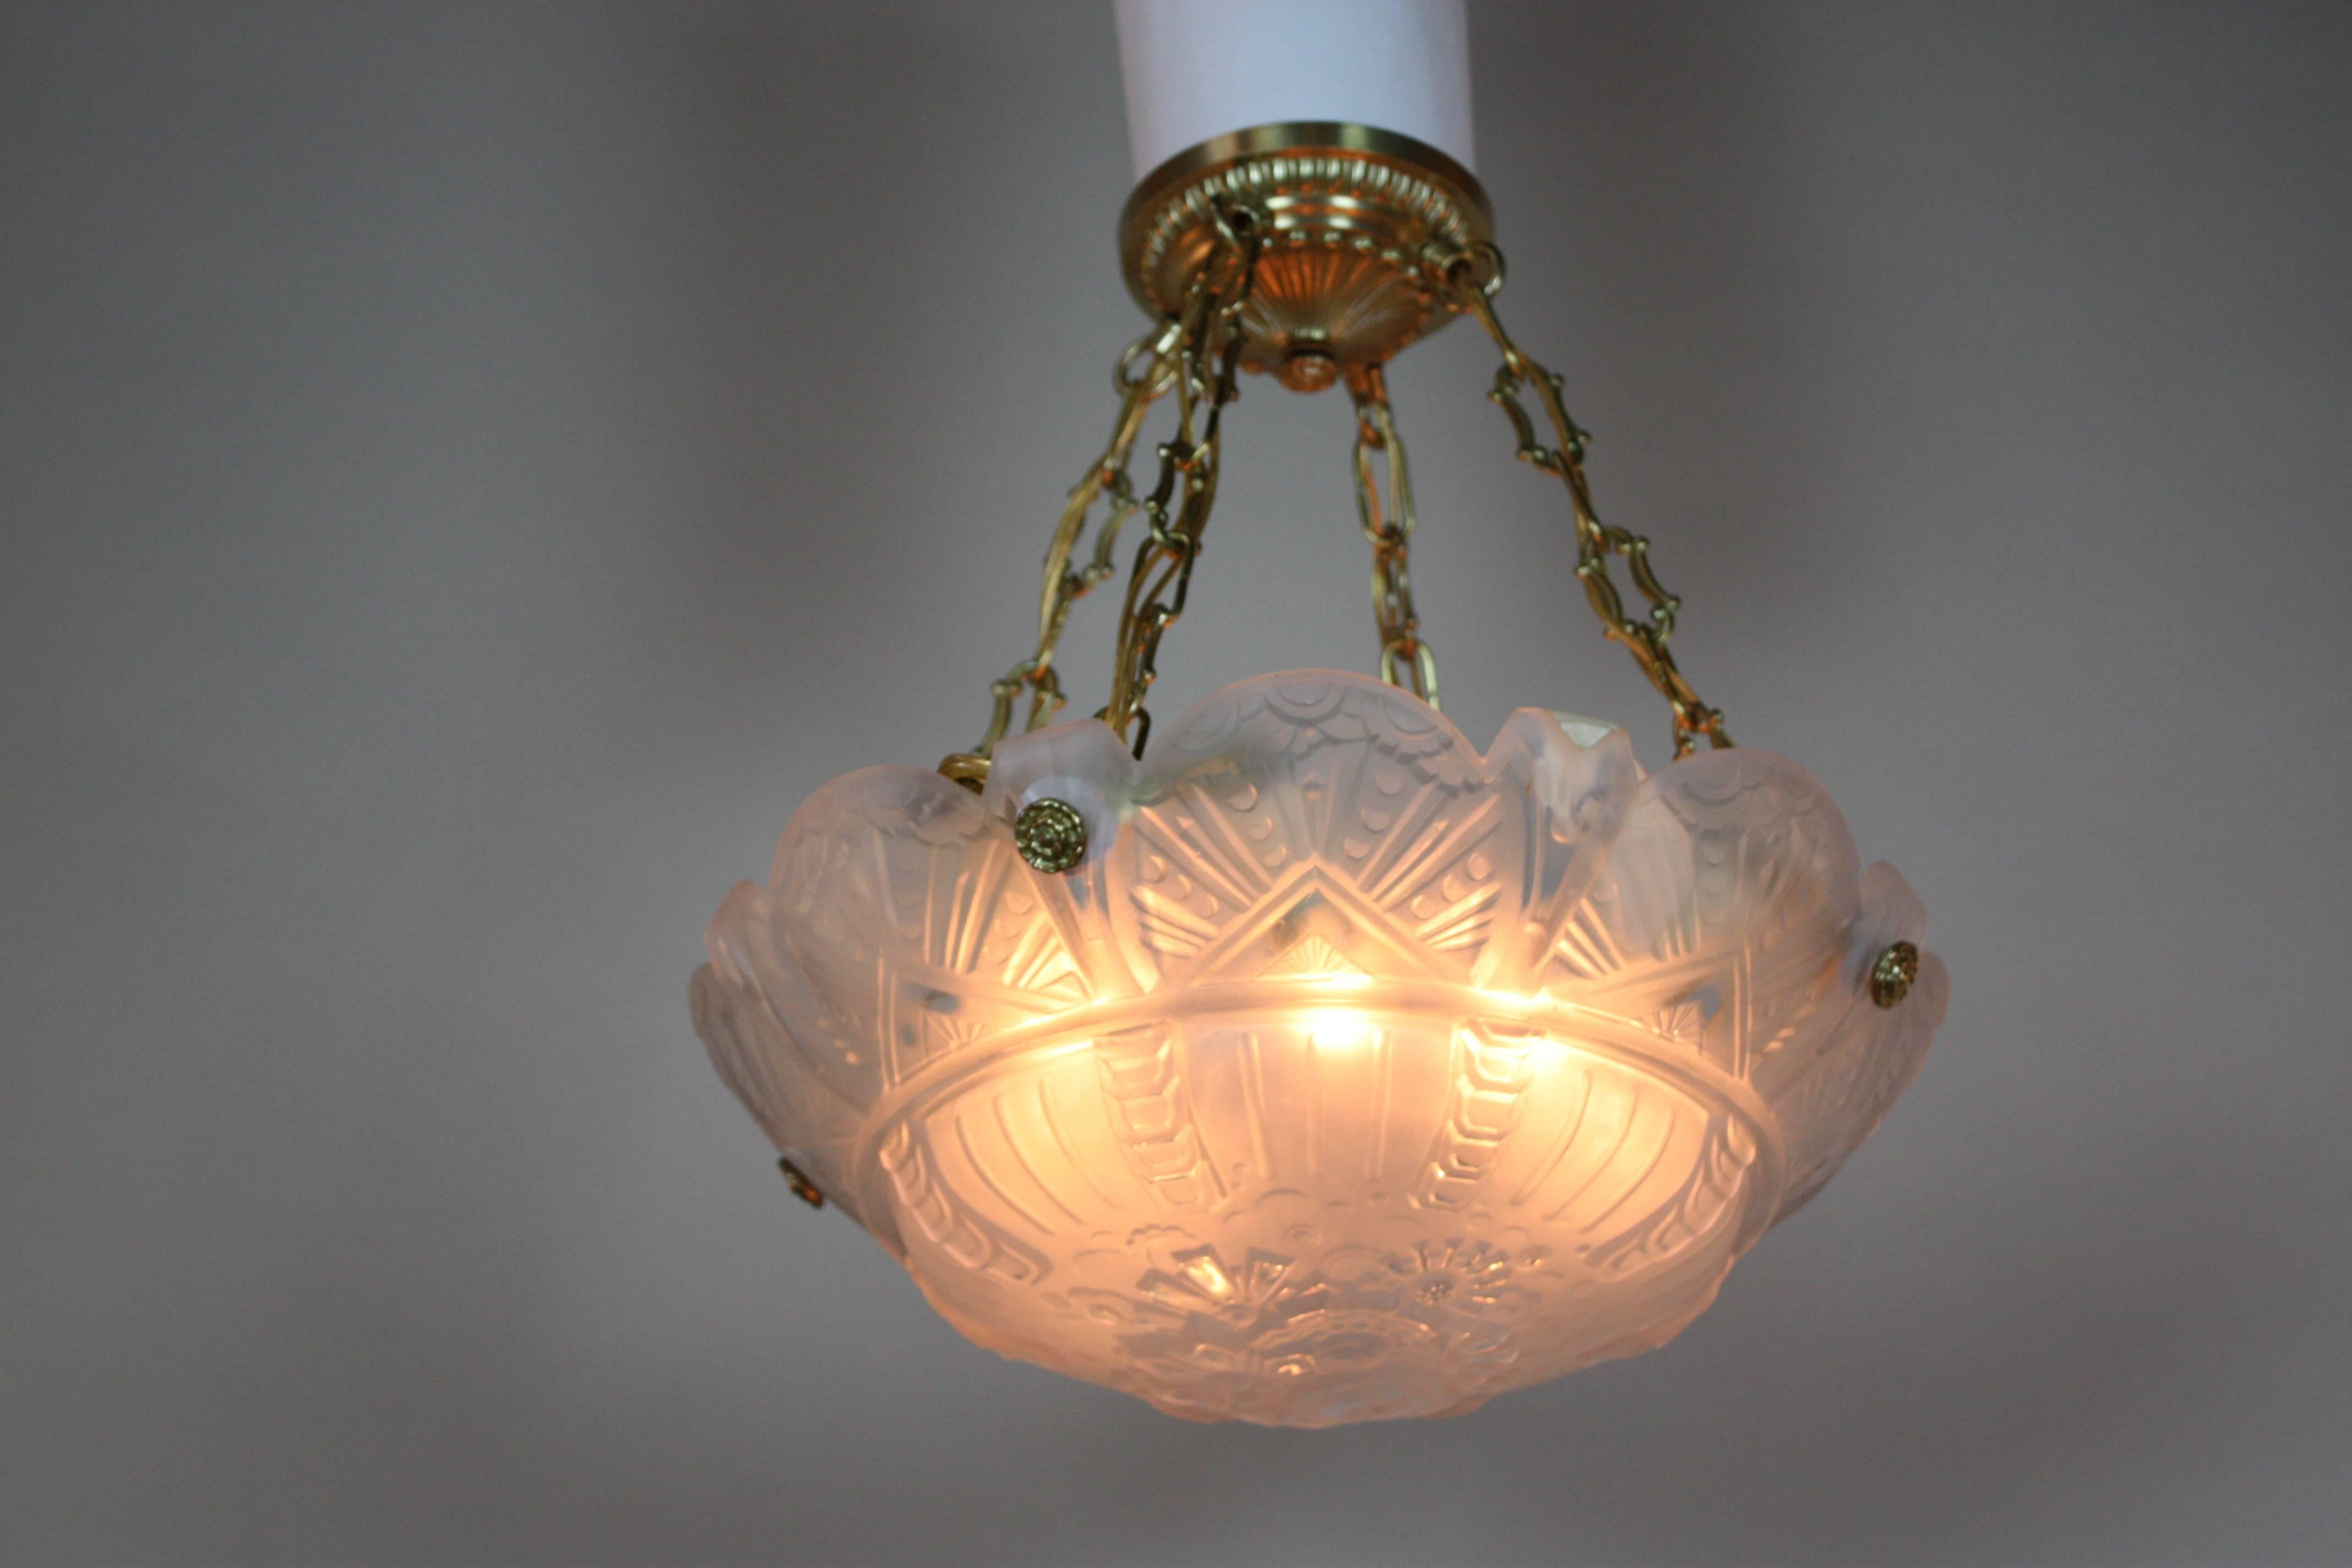 This eight-light Art Deco pendant light was designed and manufactured by the Muller Freres in Luneville, France in the 1930s. This hard to find style glass is very desirable, the glass is frost with clear polish high light and has four pendant